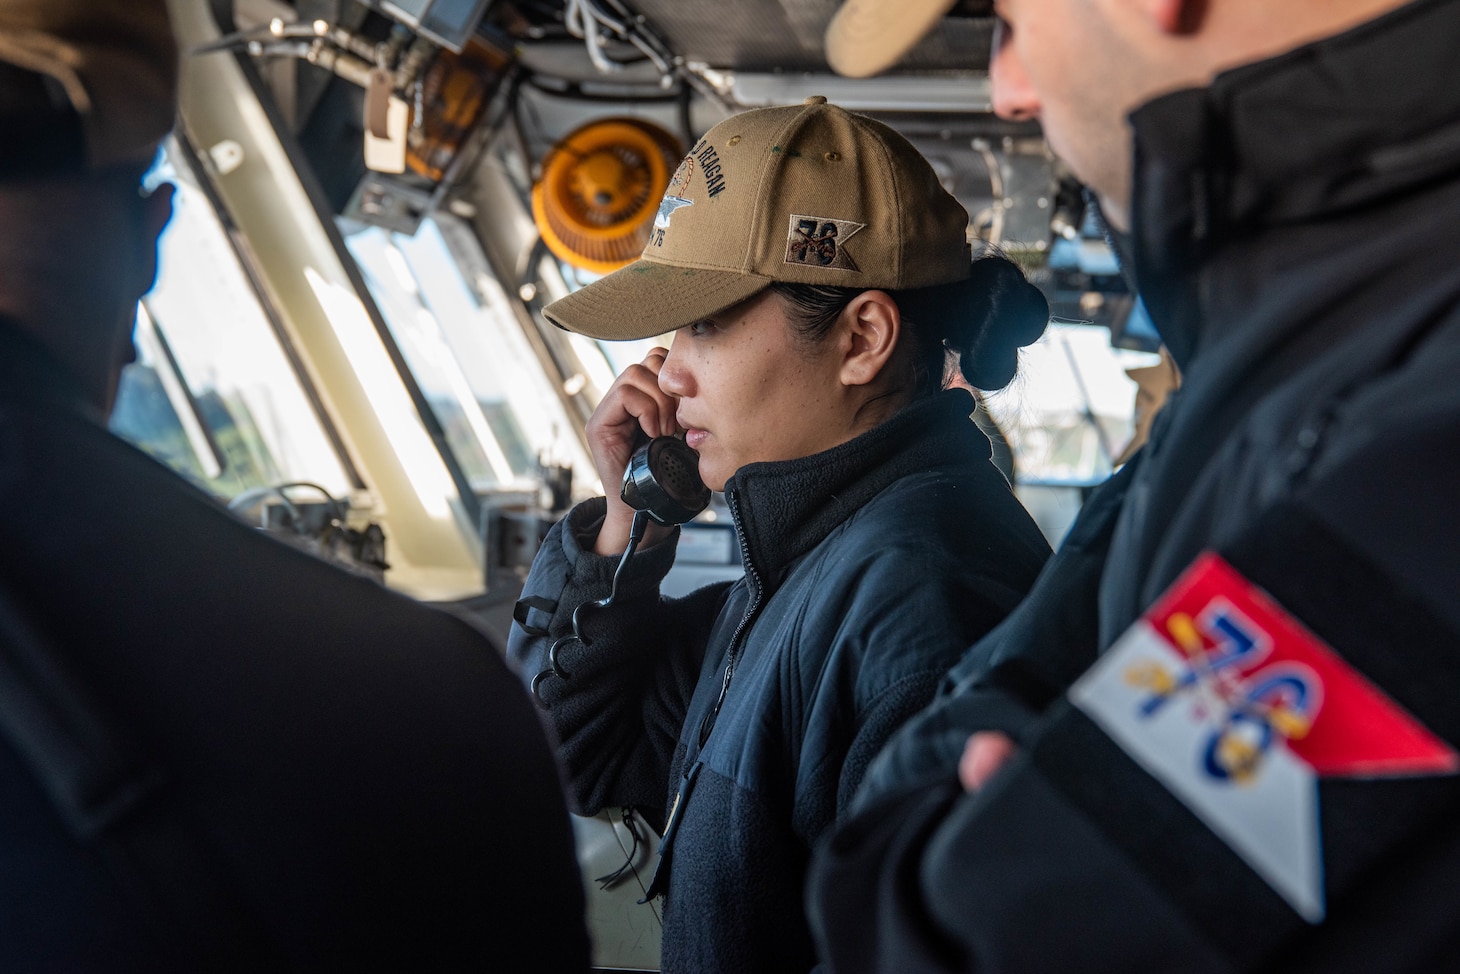 YOKOSUKA, Japan (Nov. 19, 2023) Ensign Melody Medina, from New York, establishes communication on the bridge as the U.S. Navy’s only forward-deployed aircraft carrier, USS Ronald Reagan (CVN 76), returns to Commander, Fleet Activities Yokosuka, Japan, following a six-month deployment in the Indo-Pacific region, Nov. 19. During Ronald Reagan’s deployment, the ship conducted multinational exercises with the Japan Maritime Self-Defense Force (JMSDF), Royal Australian Navy, Indonesian Navy, and Republic of Korea Navy, a multi-large deck event with USS Carl Vinson (CVN 70), Carrier Strike Group 1, and JMSDF first-in-class helicopter destroyer, JS Hyuga (DDH 181), and visited Vietnam, Republic of Korea, and the Philippines. Ronald Reagan, the flagship of Carrier Strike Group 5, provides a combat-ready force that protects and defends the United States, and supports alliances, partnerships and collective maritime interests in the Indo-Pacific region. (U.S. Navy photo by Mass Communication Specialist 3rd Class Jordan Brown)